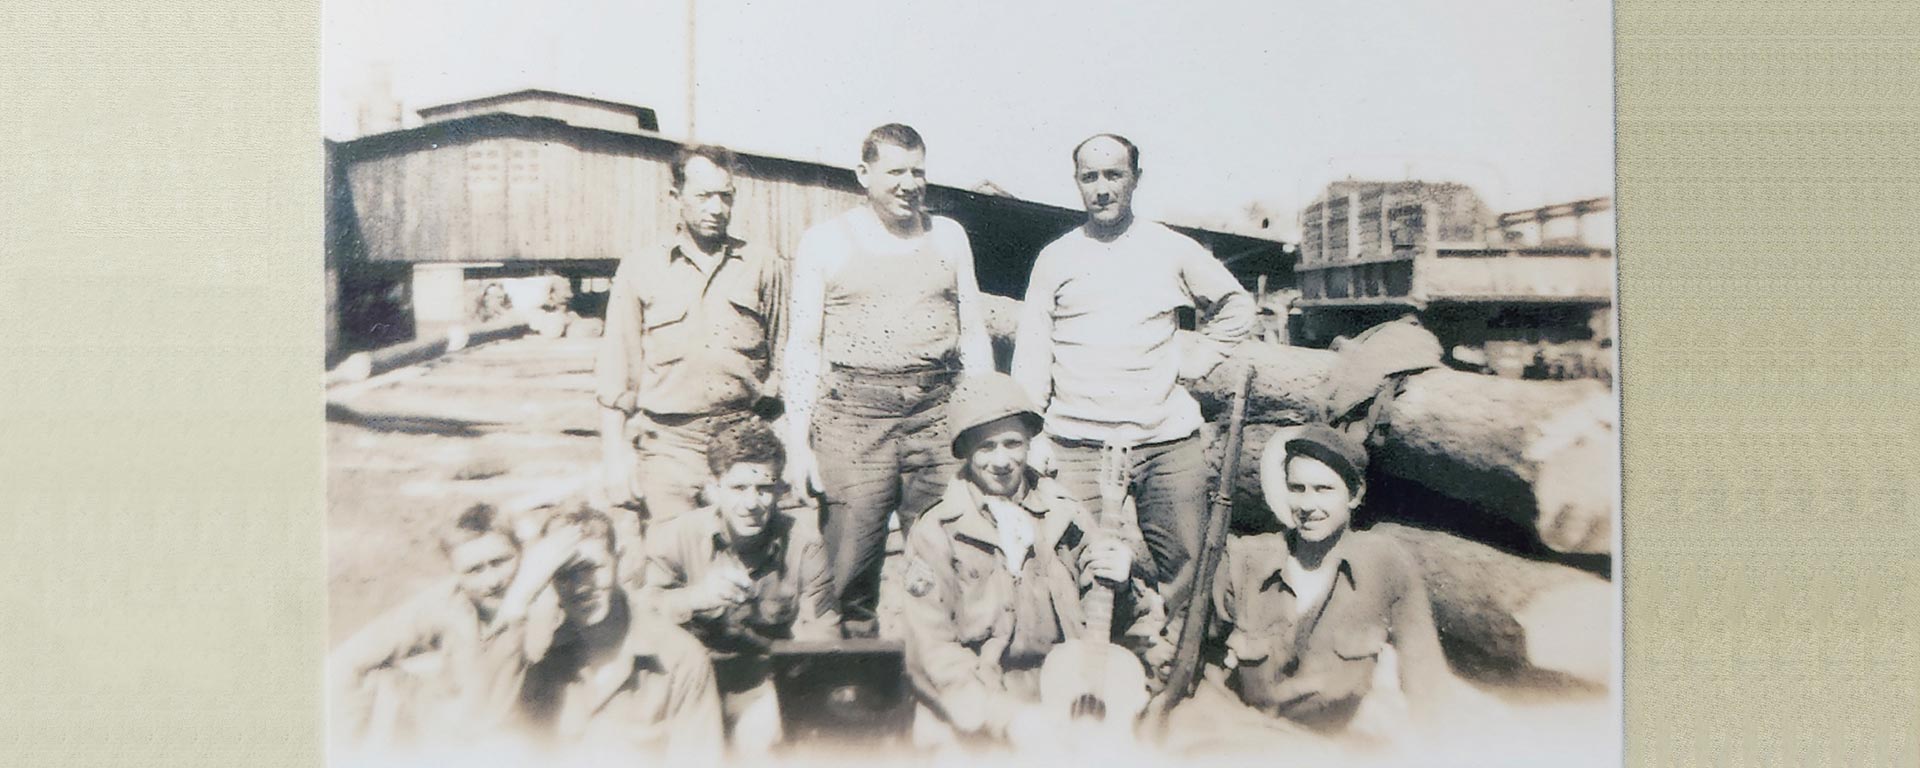 Old photo of T Joe Walker, holding guitar, with other soldiers during World War II.